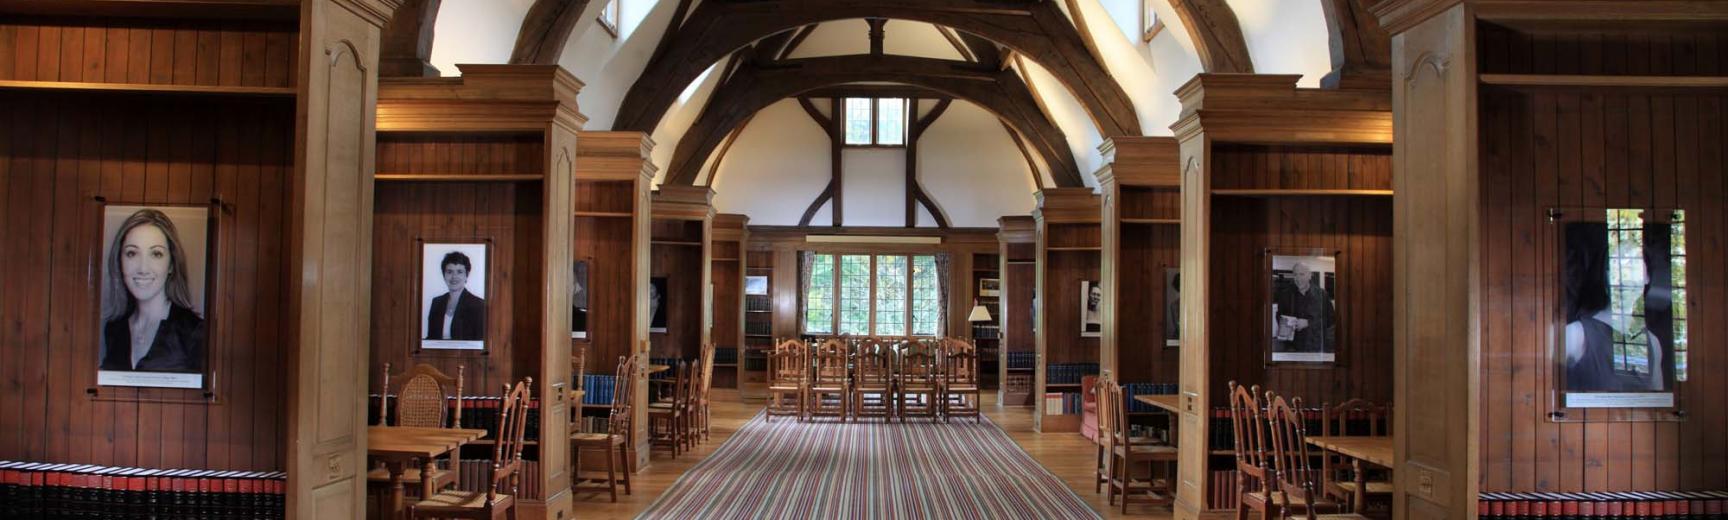 rosebery room at rhodes house formerly part of the bodleian library picture by lee atherton